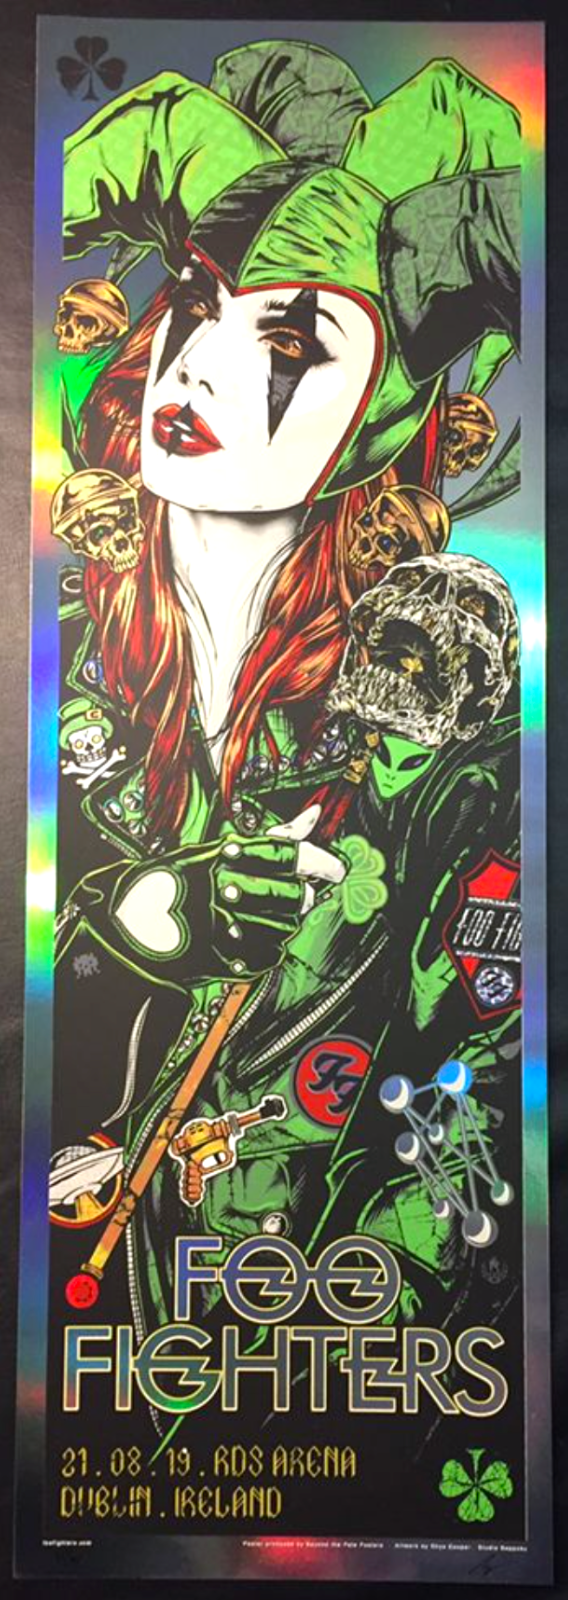 Foo Fighters Dublin 2019 (FOIL Variant) by Rhys Cooper